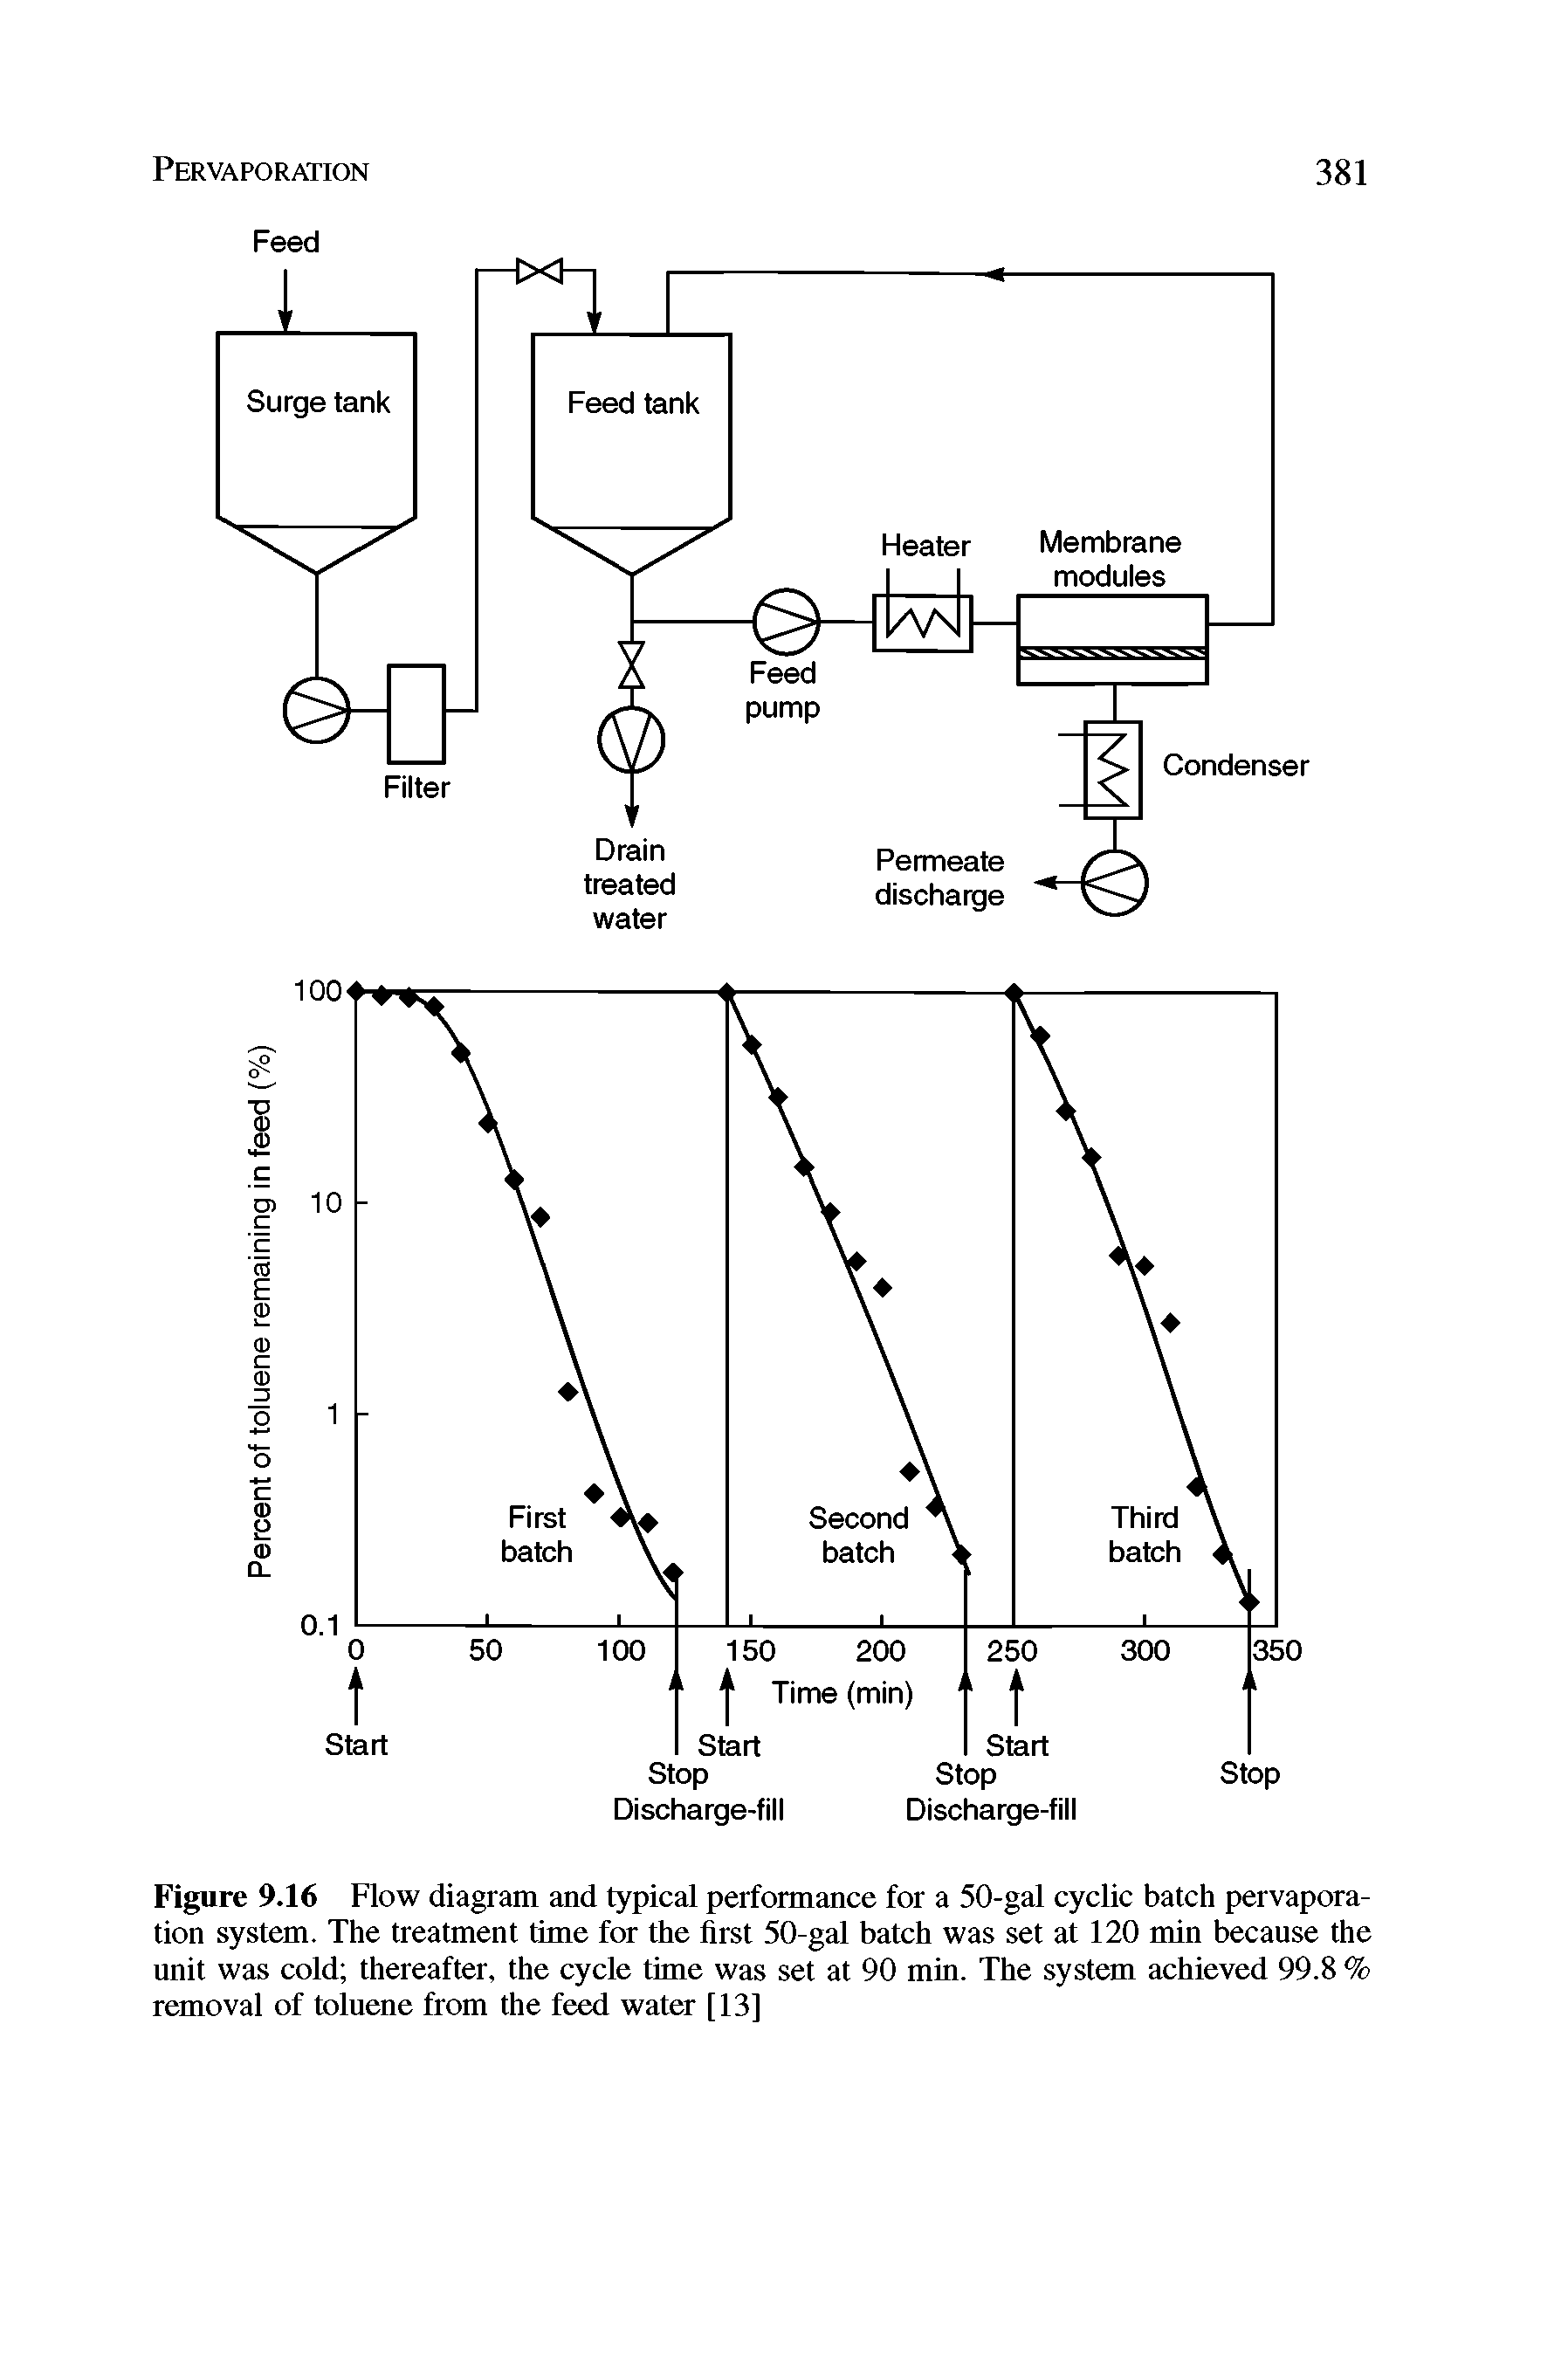 Figure 9.16 Flow diagram and typical performance for a 50-gal cyclic batch pervaporation system. The treatment time for the first 50-gal batch was set at 120 min because the unit was cold thereafter, the cycle time was set at 90 min. The system achieved 99.8 % removal of toluene from the feed water [13]...